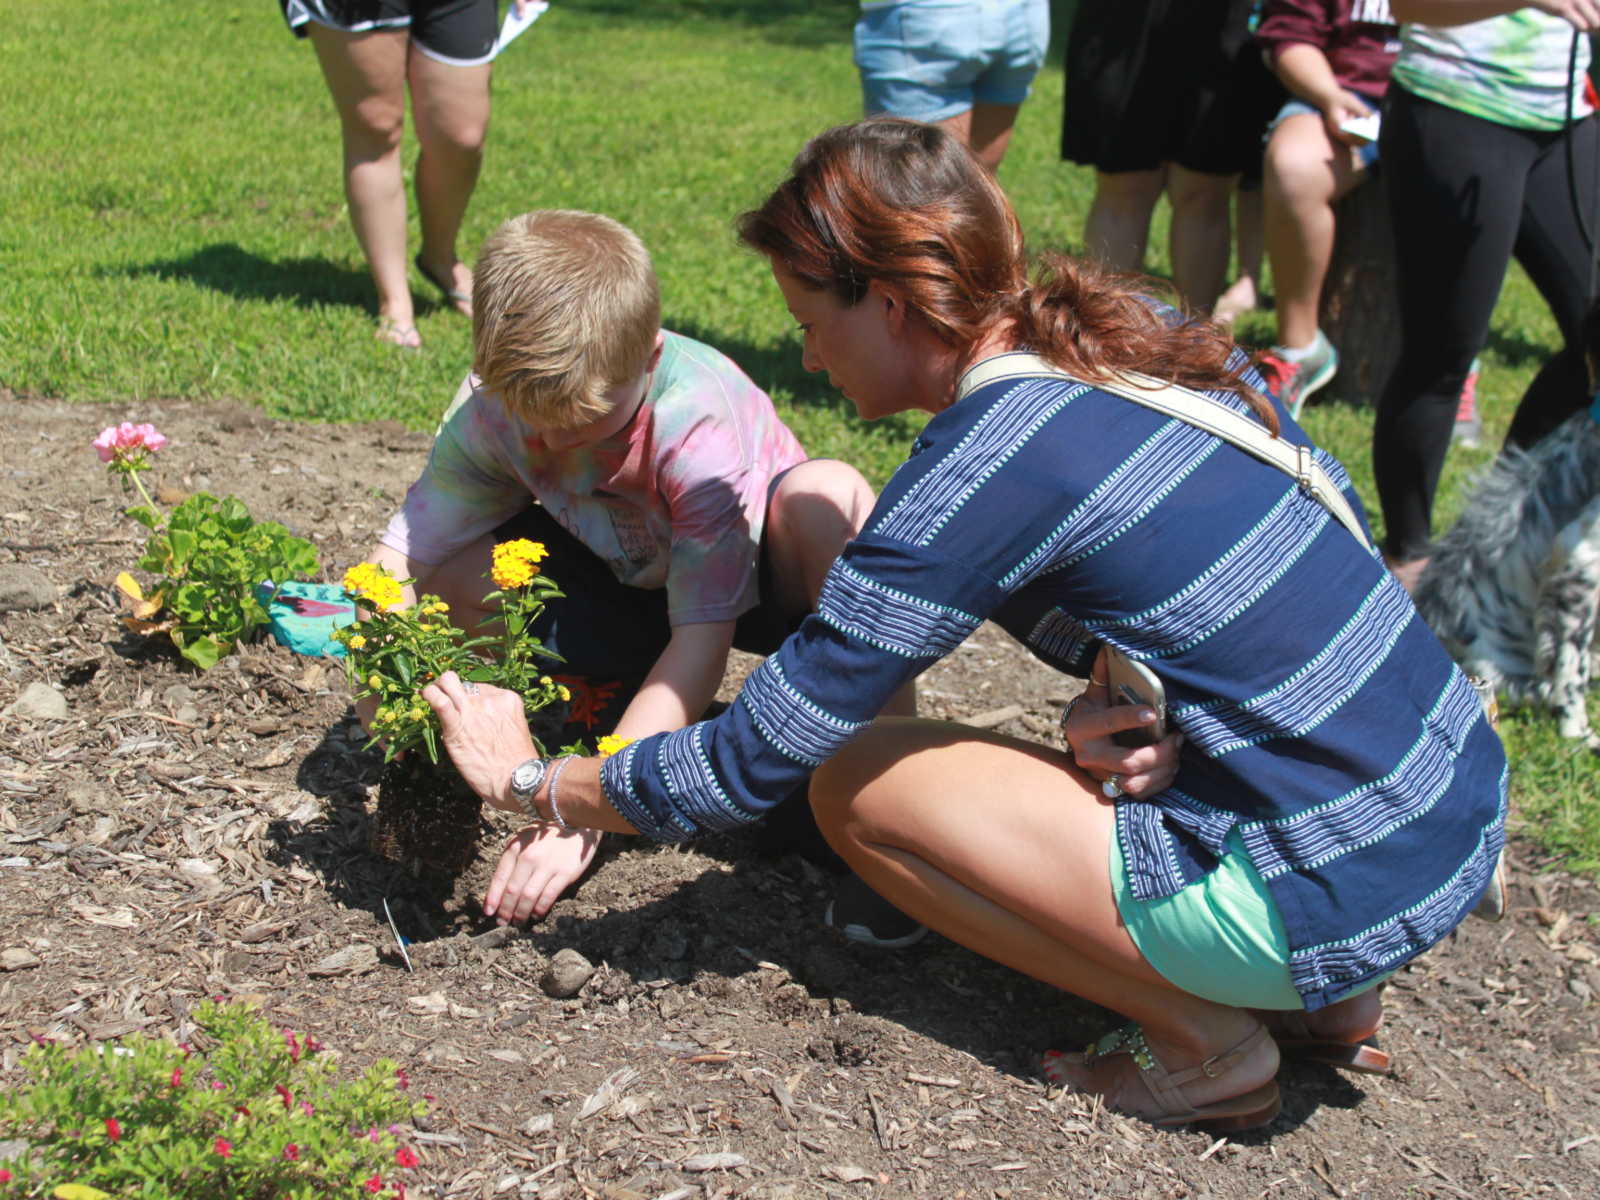 woman crouches down to help boy plant a yellow flower next to pink and red flower